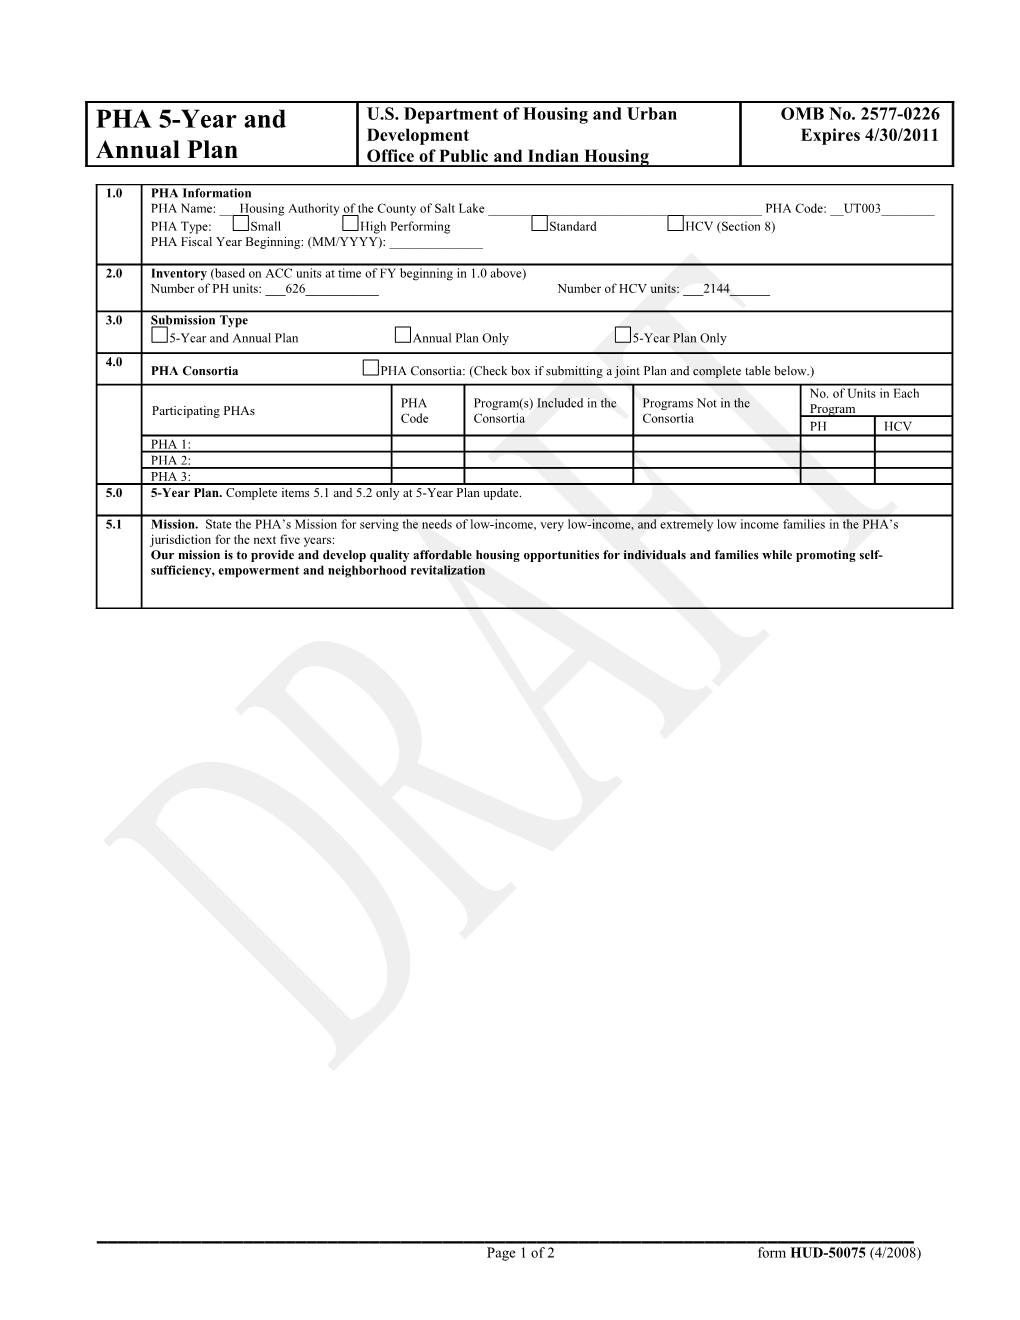 Page 1 of 2 Form HUD-50075 (4/2008)